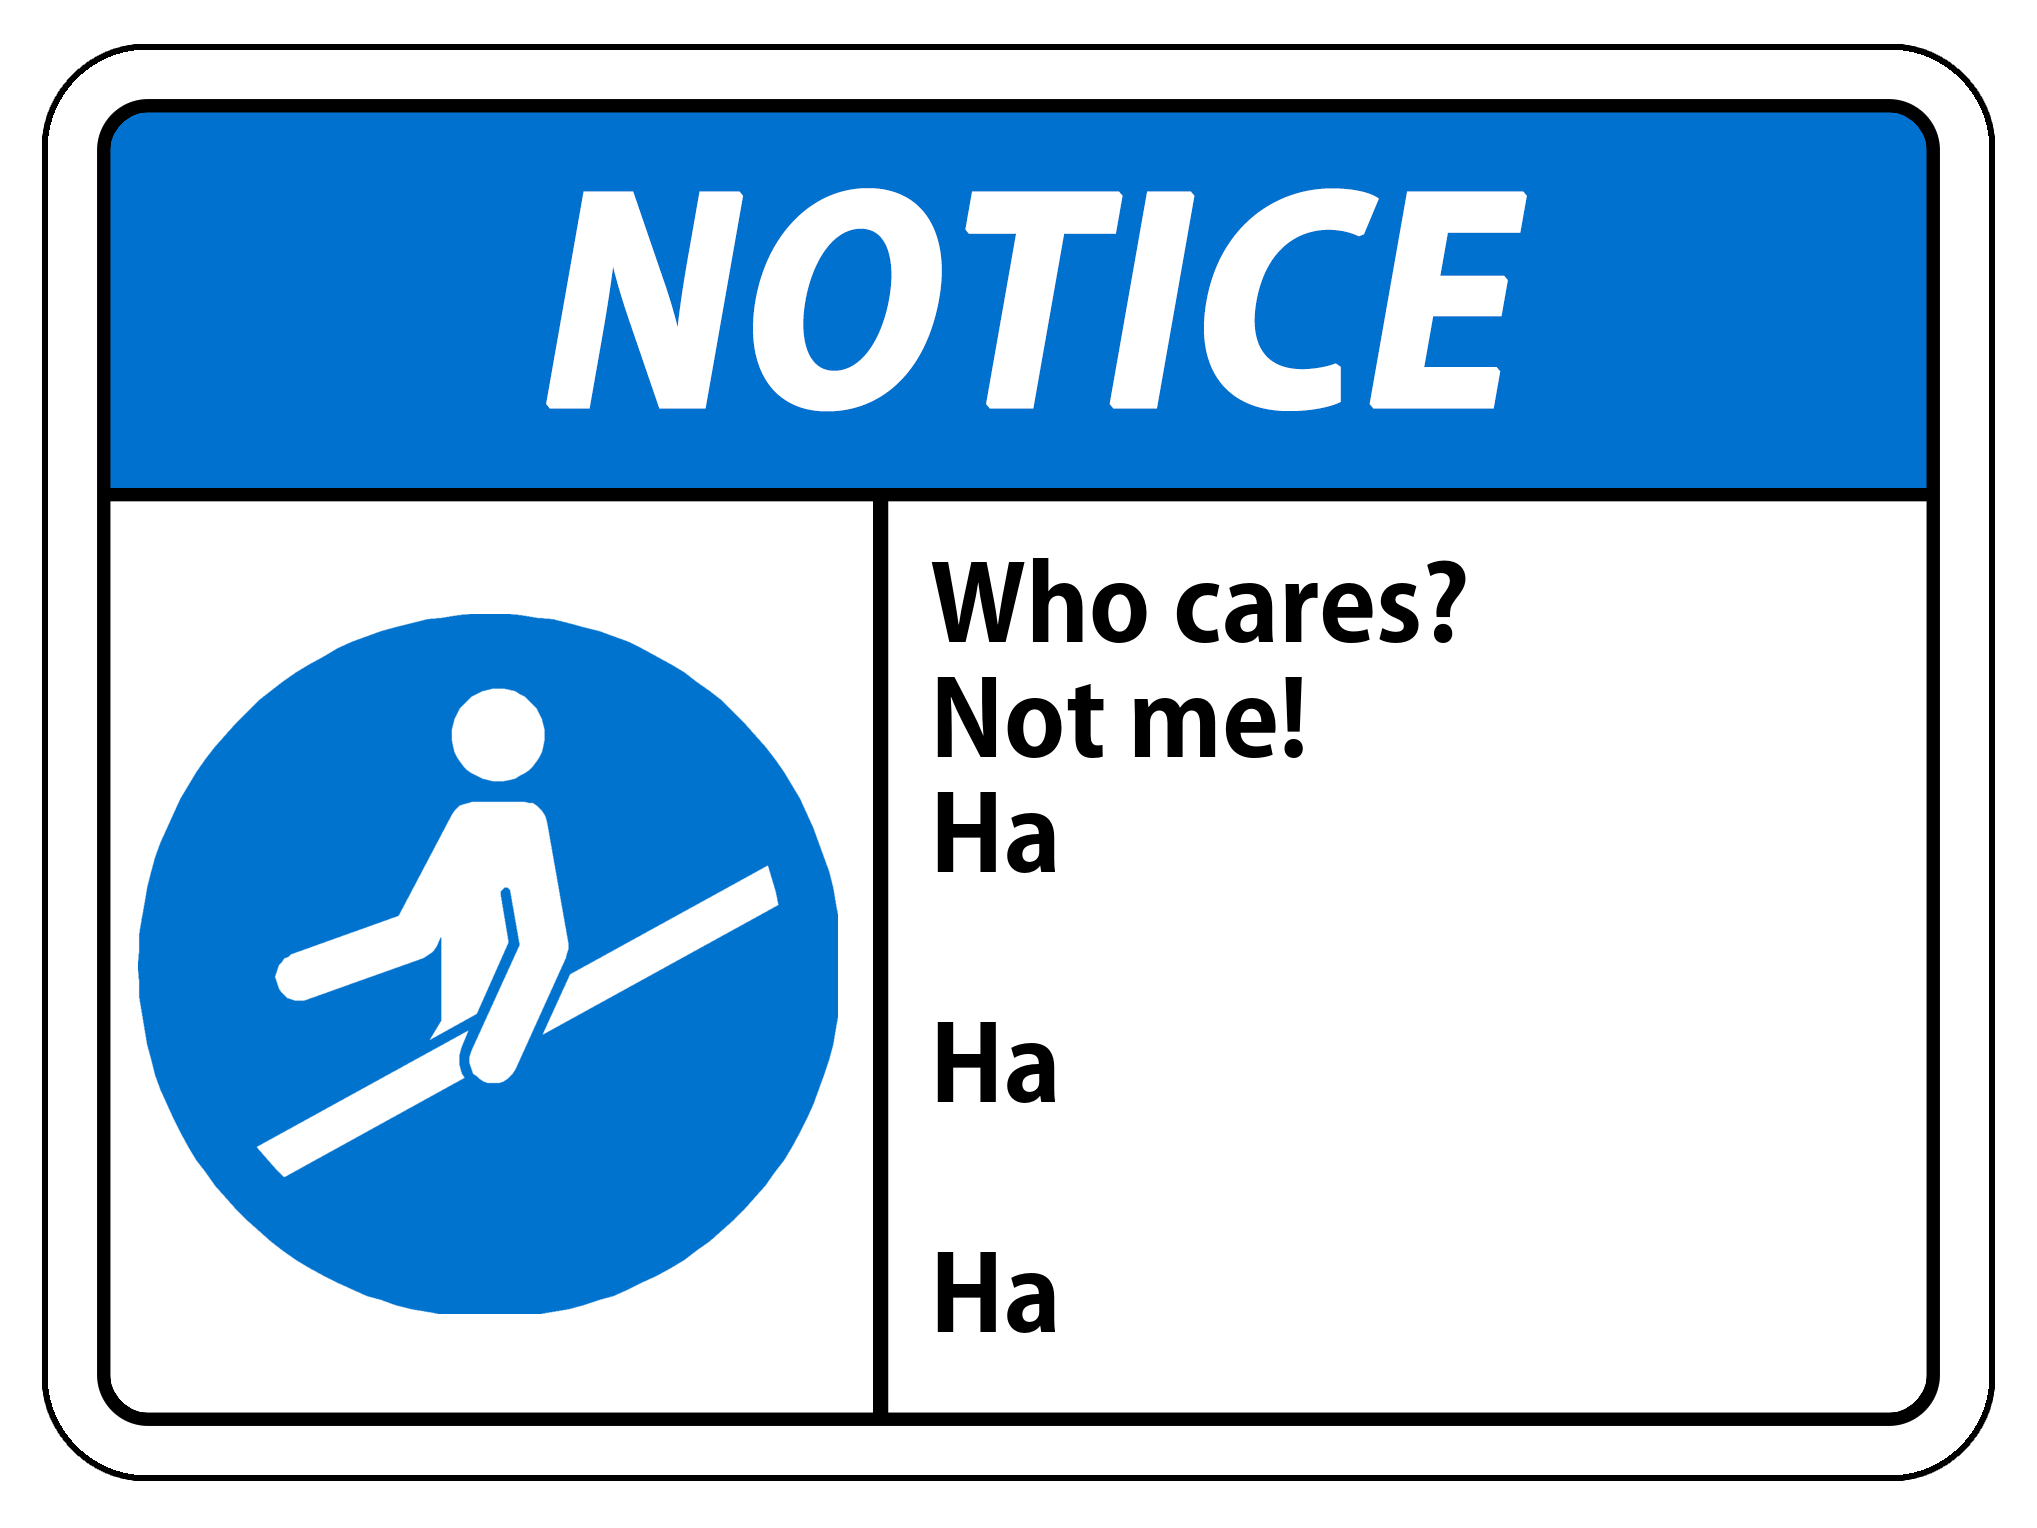 A sign in the style of an official warning sign, saying "Notice: Who cares? Not me! Ha ha ha"